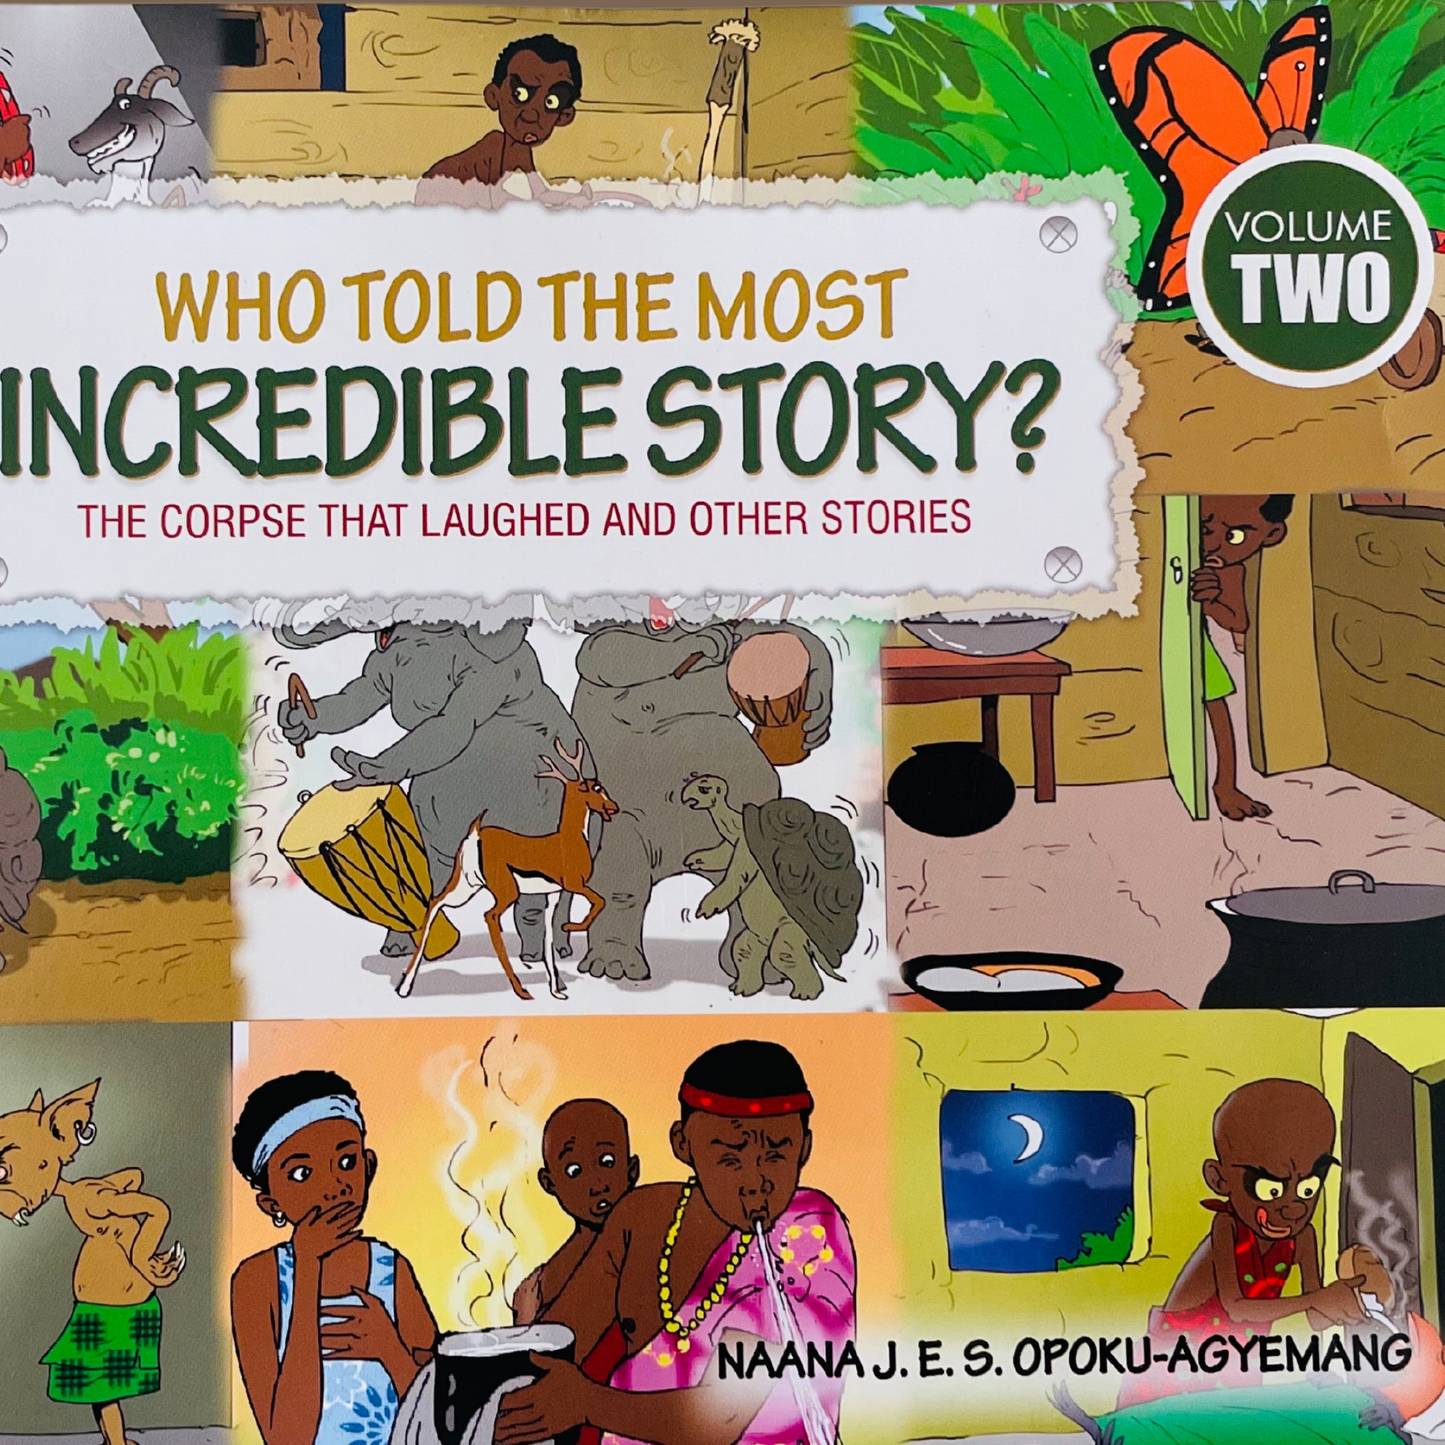 Who Told the Most Incredible Story (Volume 2): The Corpse That Laughed and Other Stories